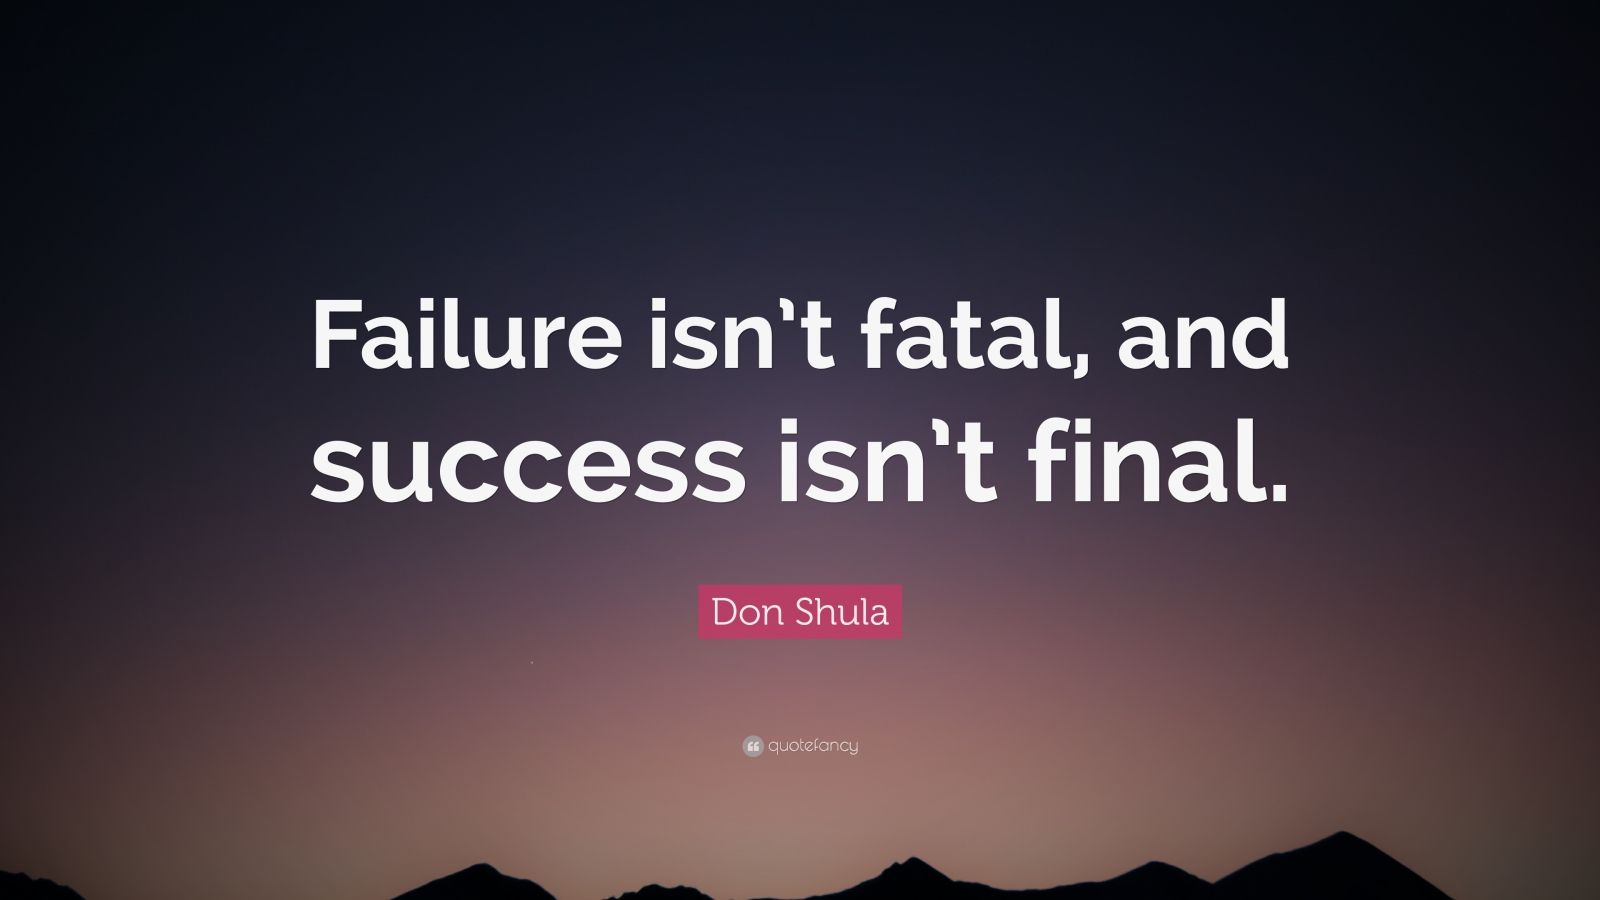 Don Shula Quote: “Failure isn’t fatal, and success isn’t final.”